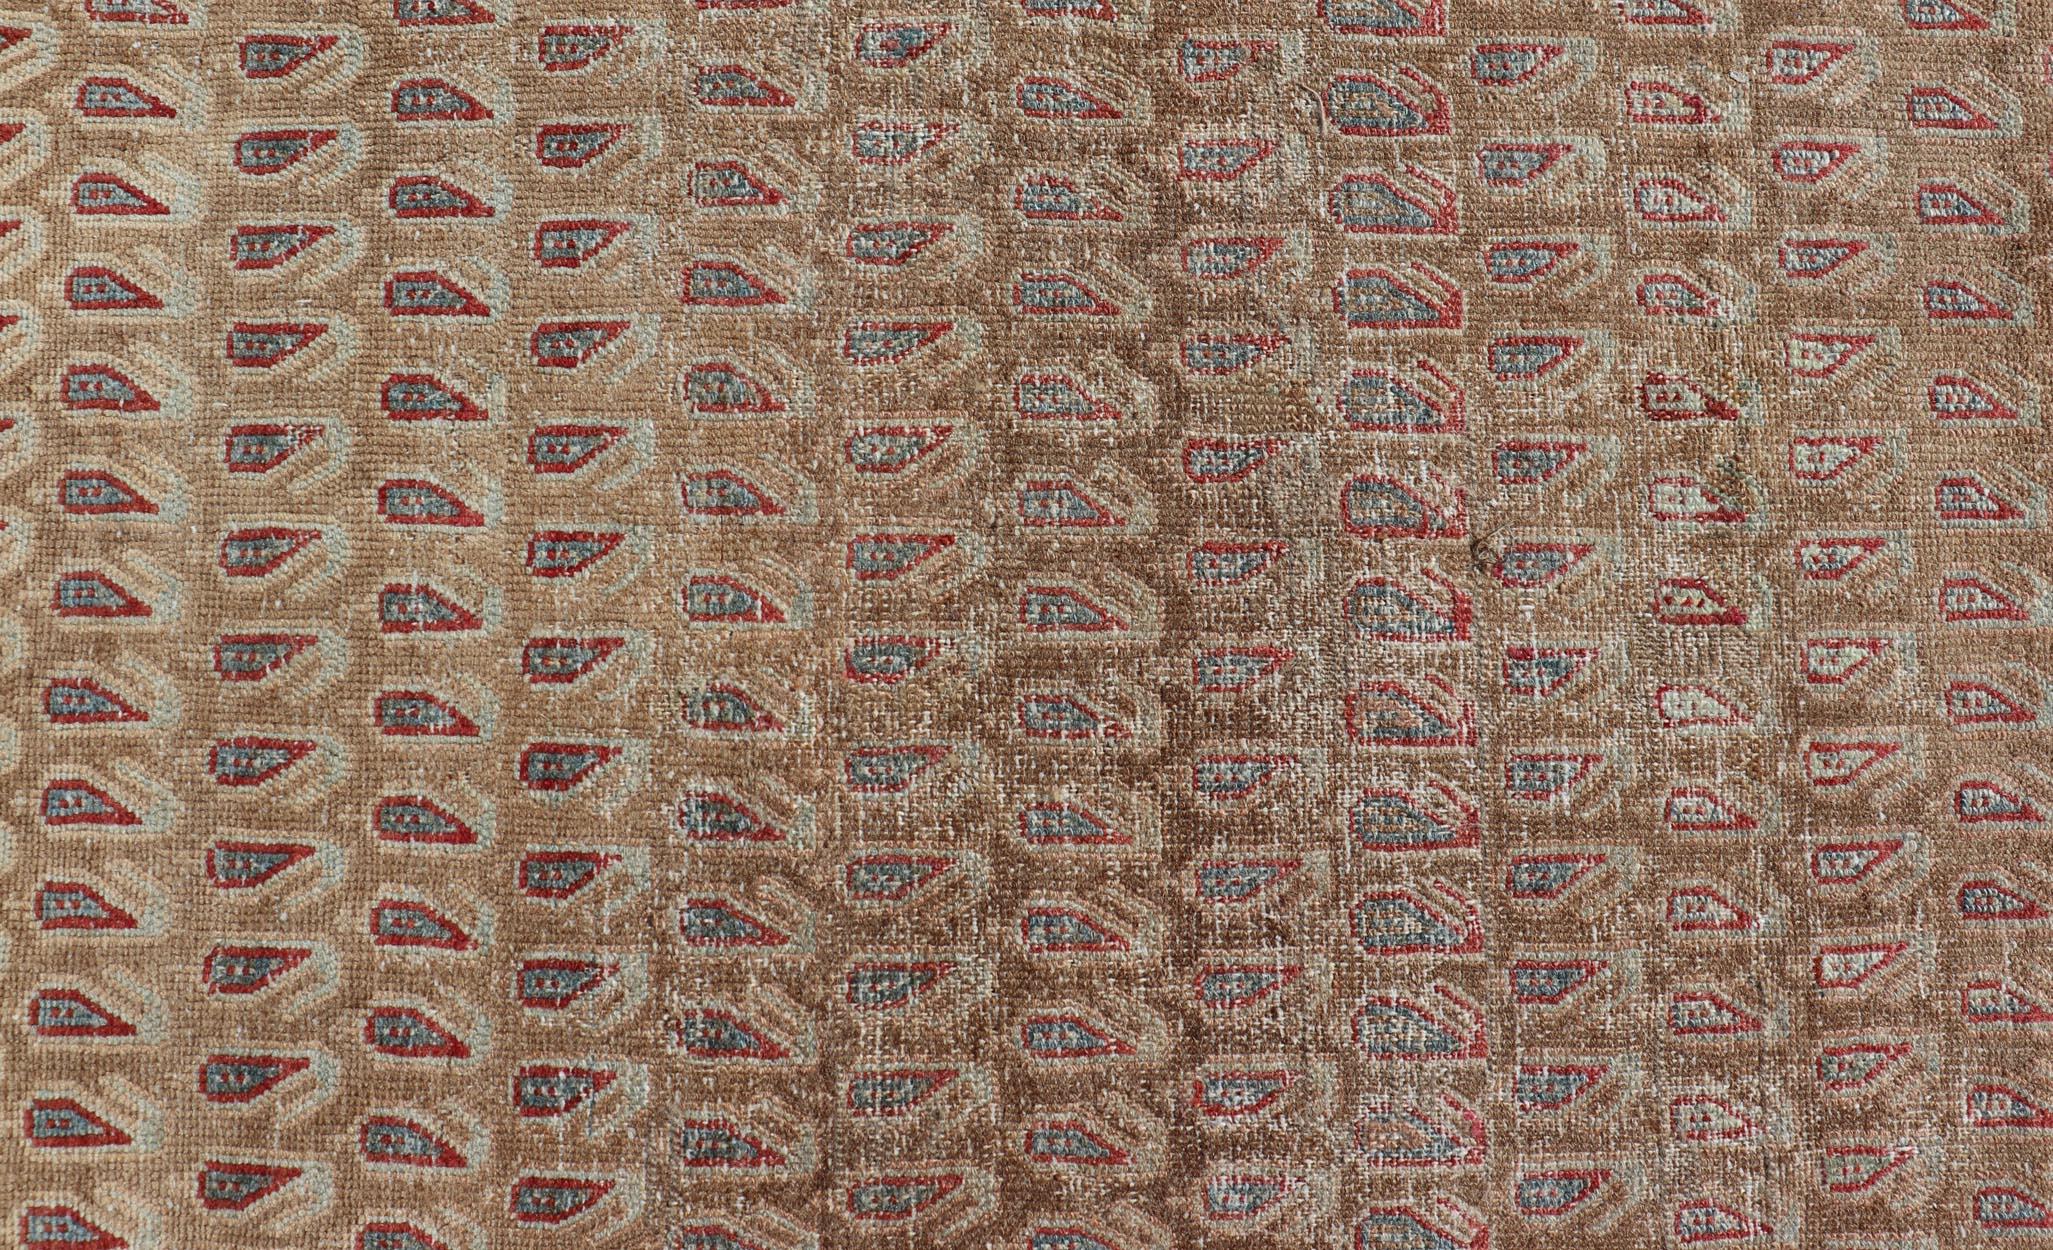 Antique Malayer Runner with All-Over Paisley Design in Red, Brown, and Blue For Sale 3